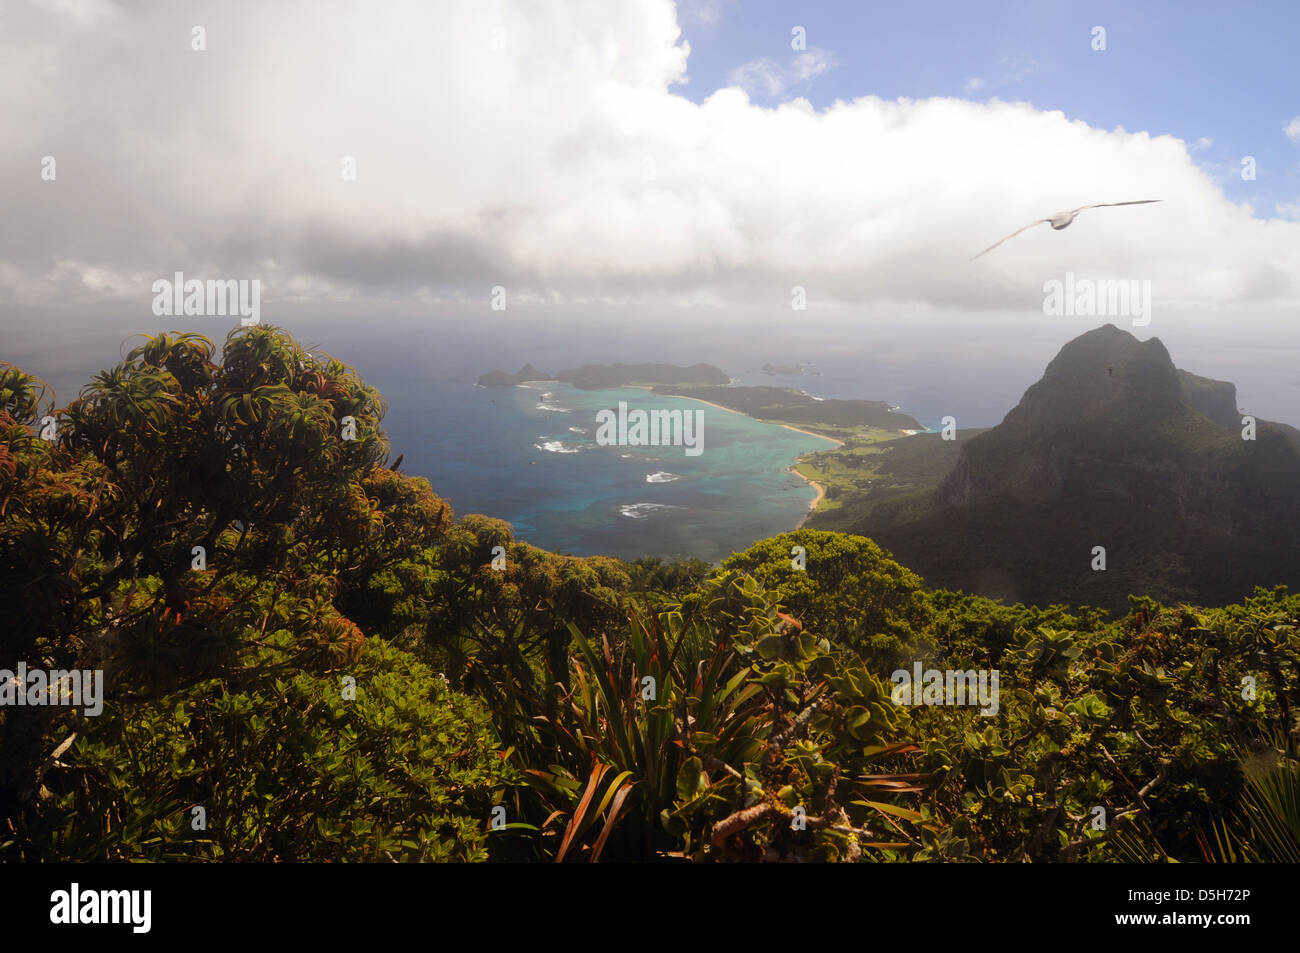 View from summit of Mt Gower over Mt Lidgbird and Lord Howe Island, with providence petrels. NSW, Australia Stock Photo